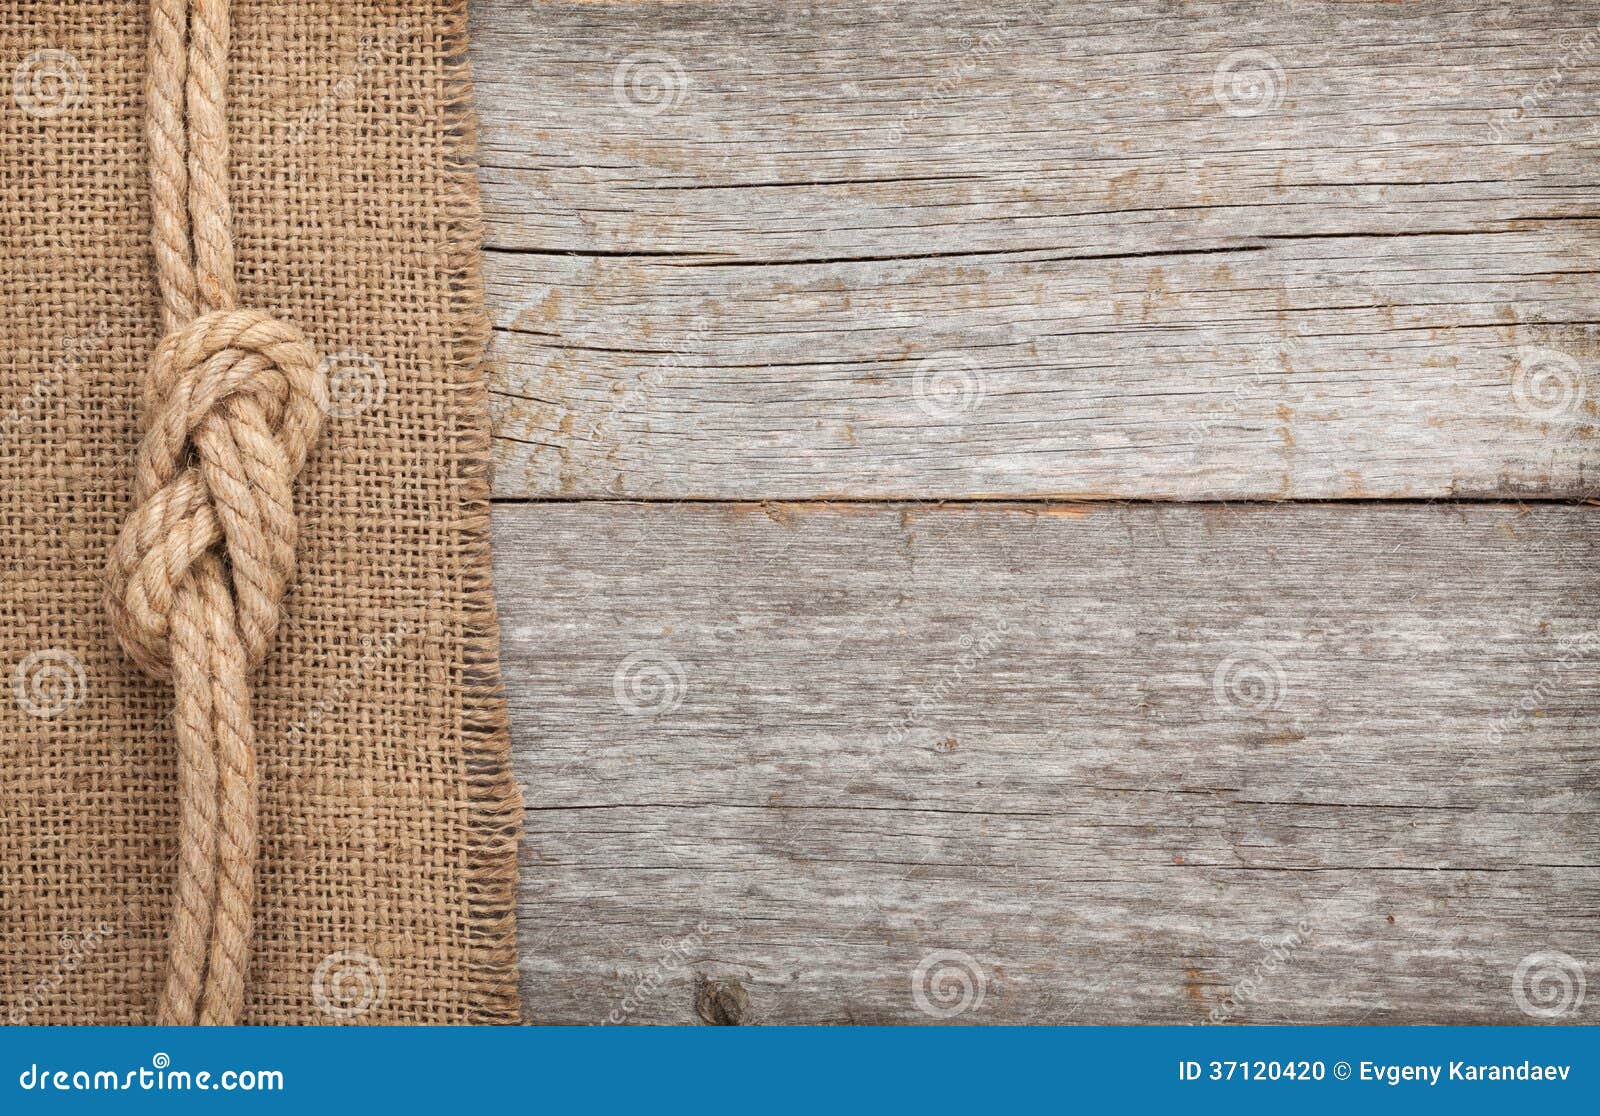 Ship Rope On Wood And Burlap Texture Background Stock Photo - Image 